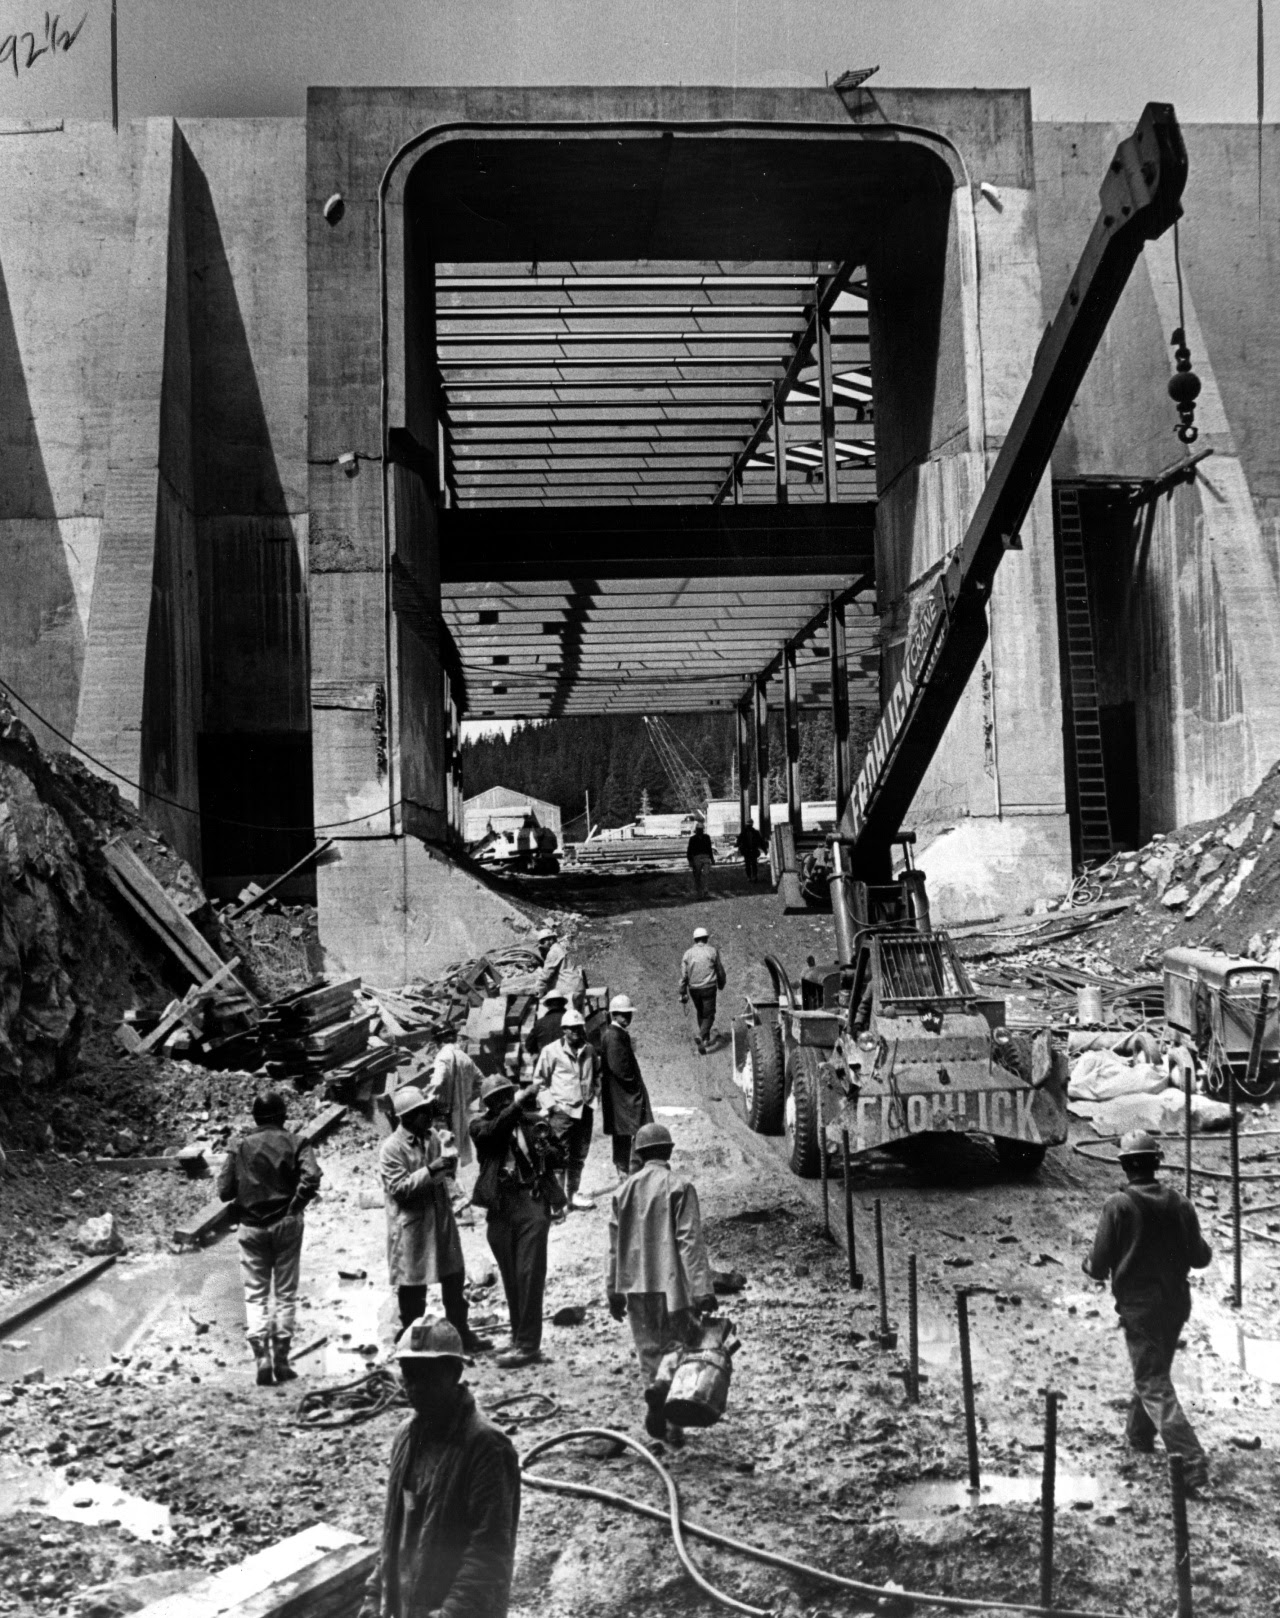 Eisenhower Tunnel under construction in the late 1960s.jpg detail image